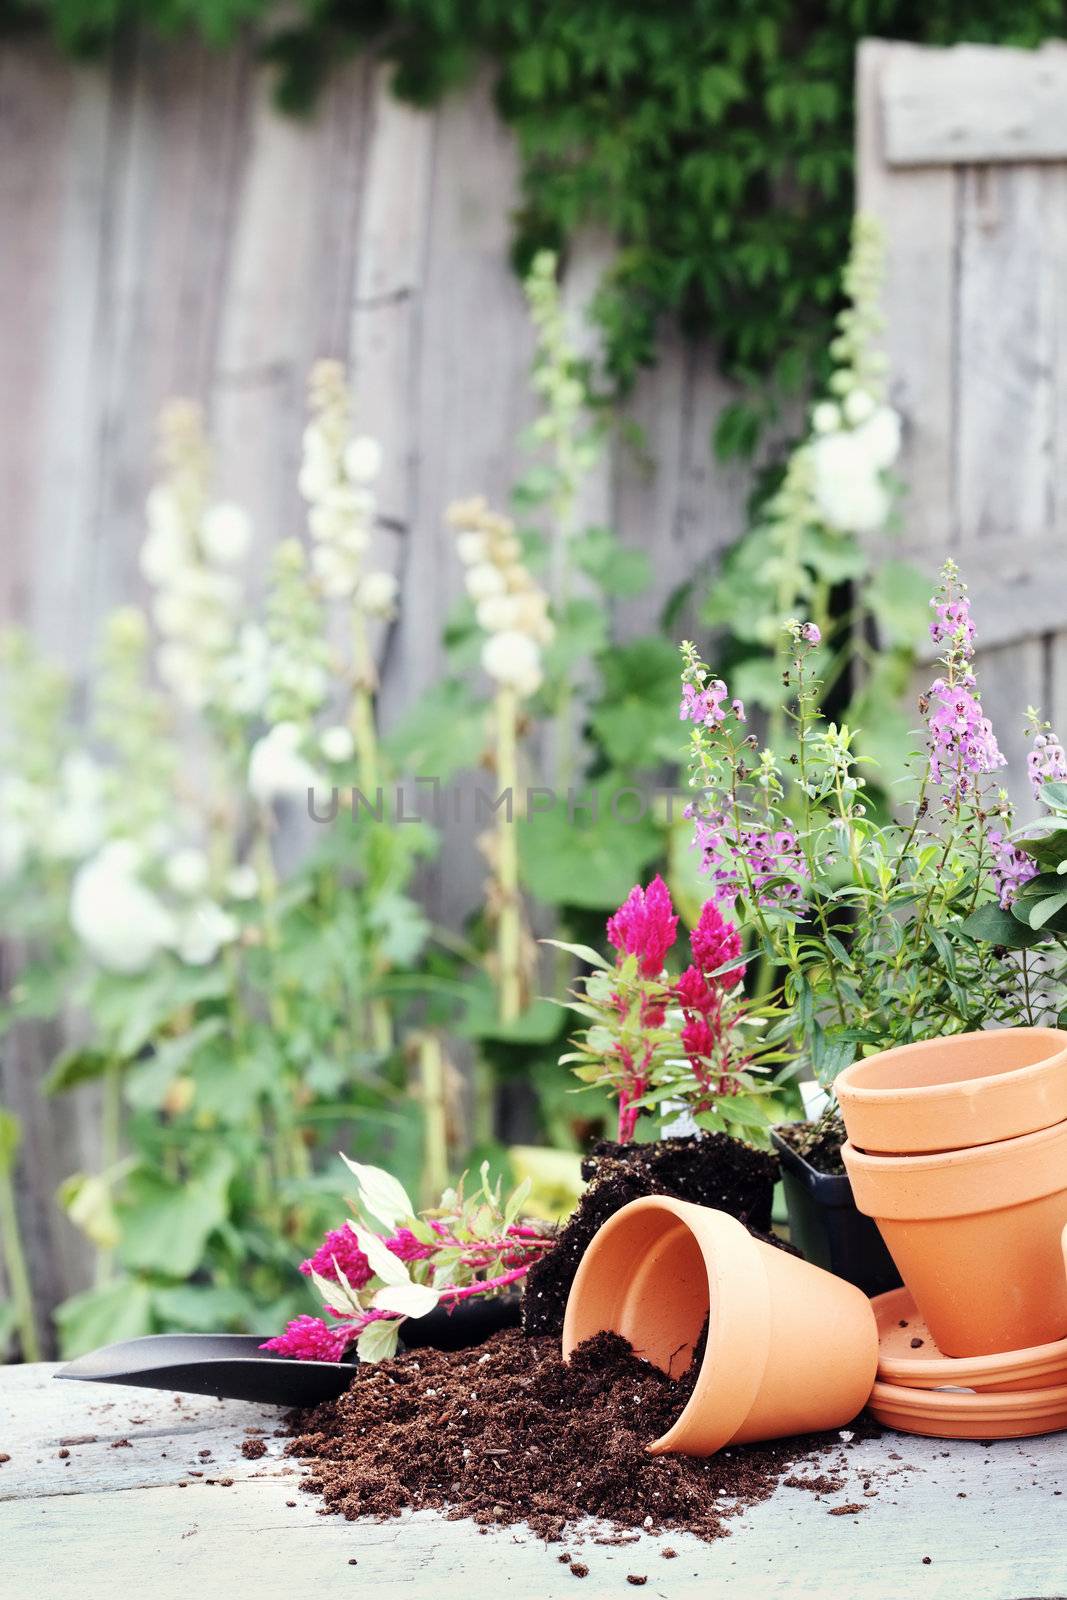 Rustic table with terracotta pots, potting soil, trowel and flowers in front of an old weathered gardening shed.